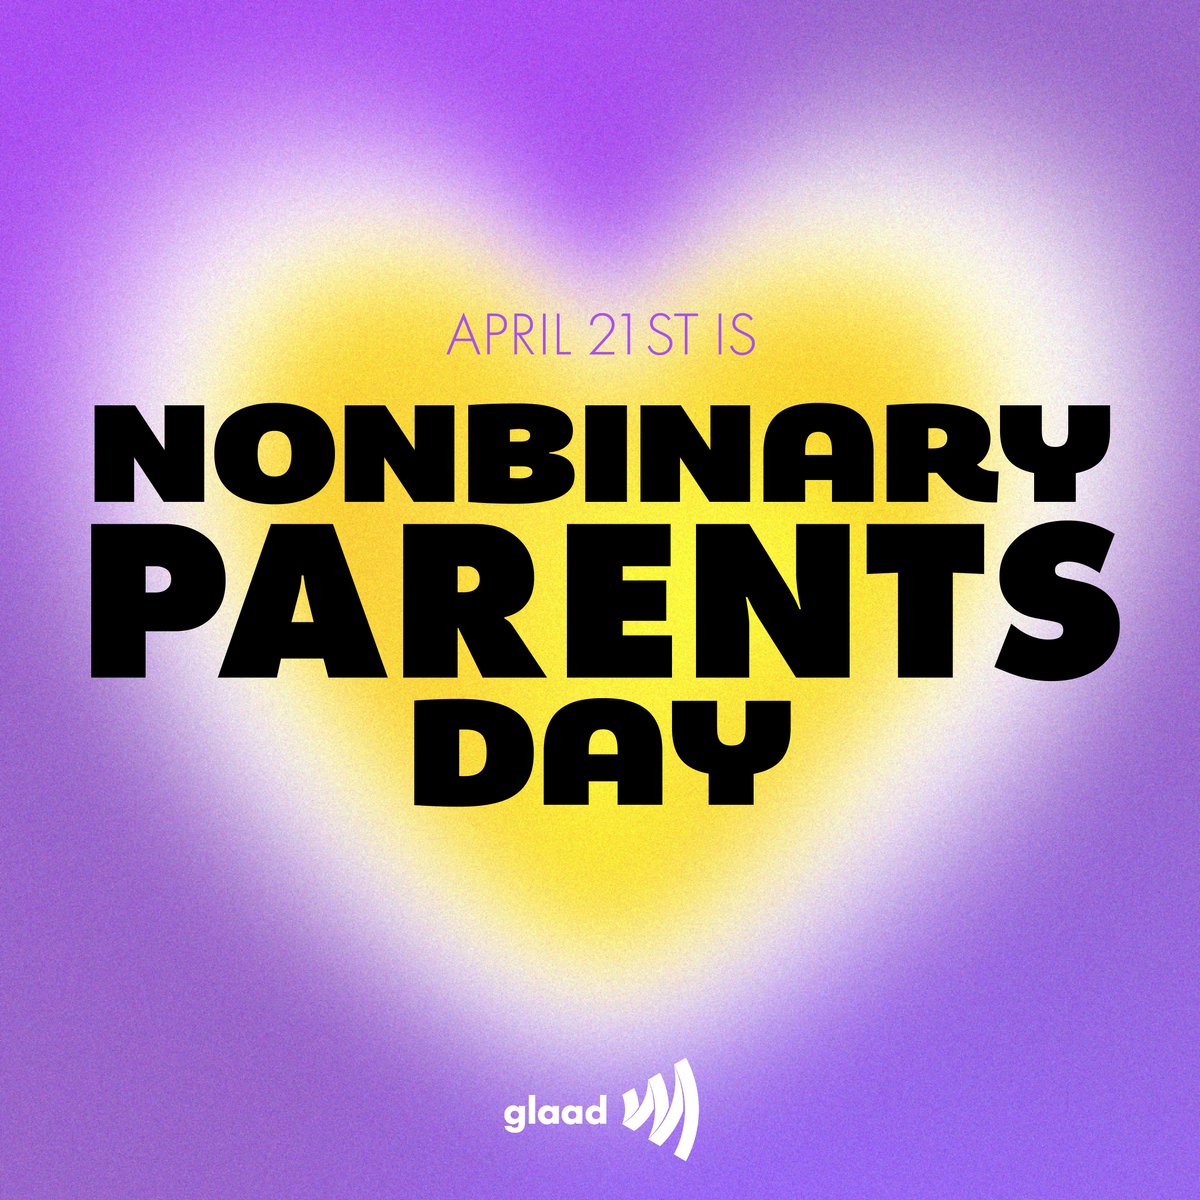 Happy Nonbinary Parents Day, celebrating all nonbinary people raising families. 💛🤍💜🖤